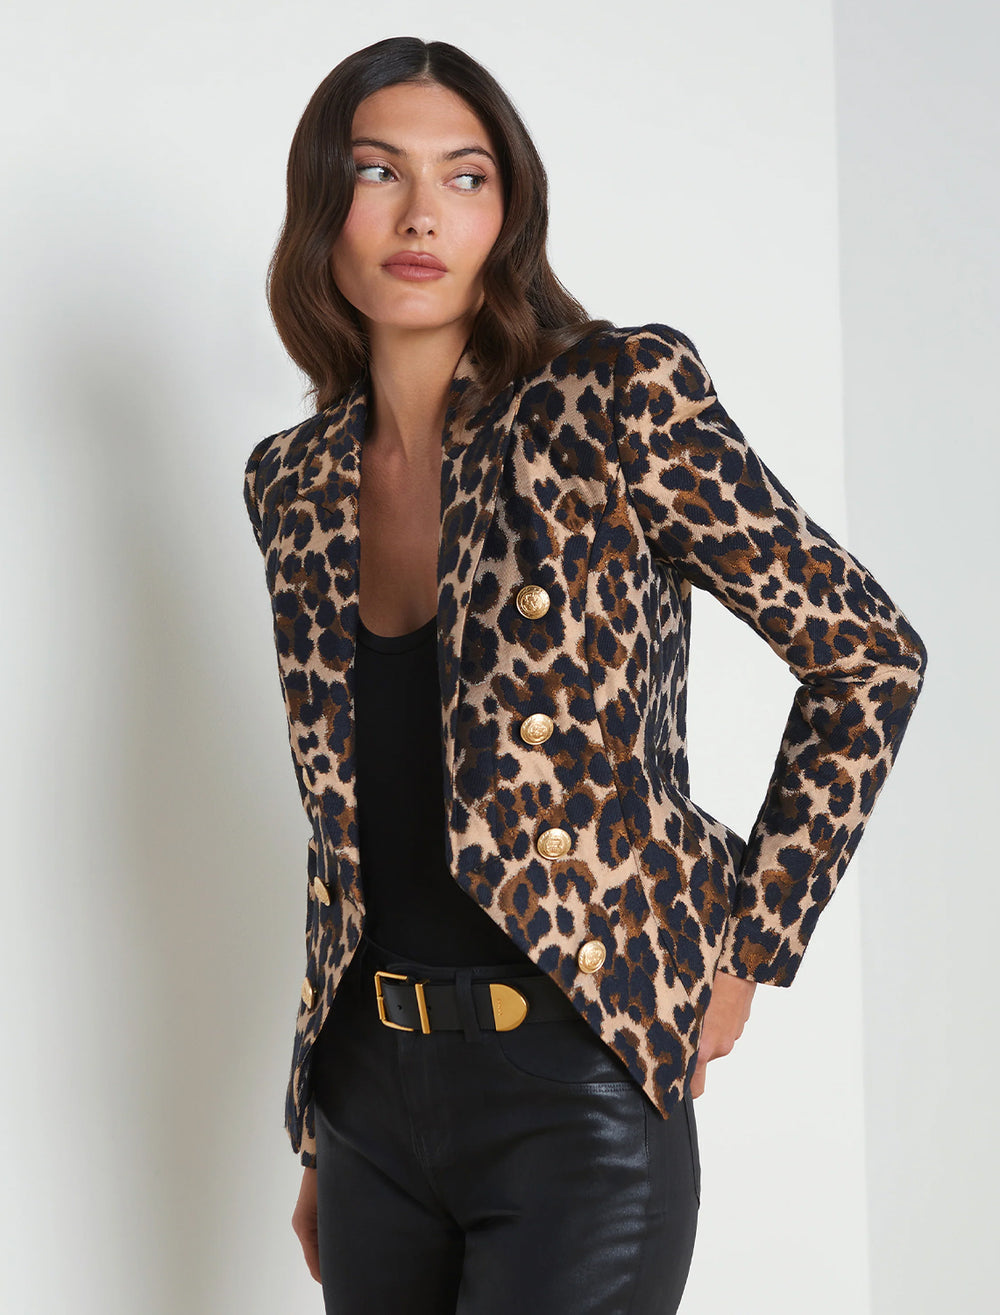 Model wearing L'agence's bethany structured blazer in cashew leopard jacquard.